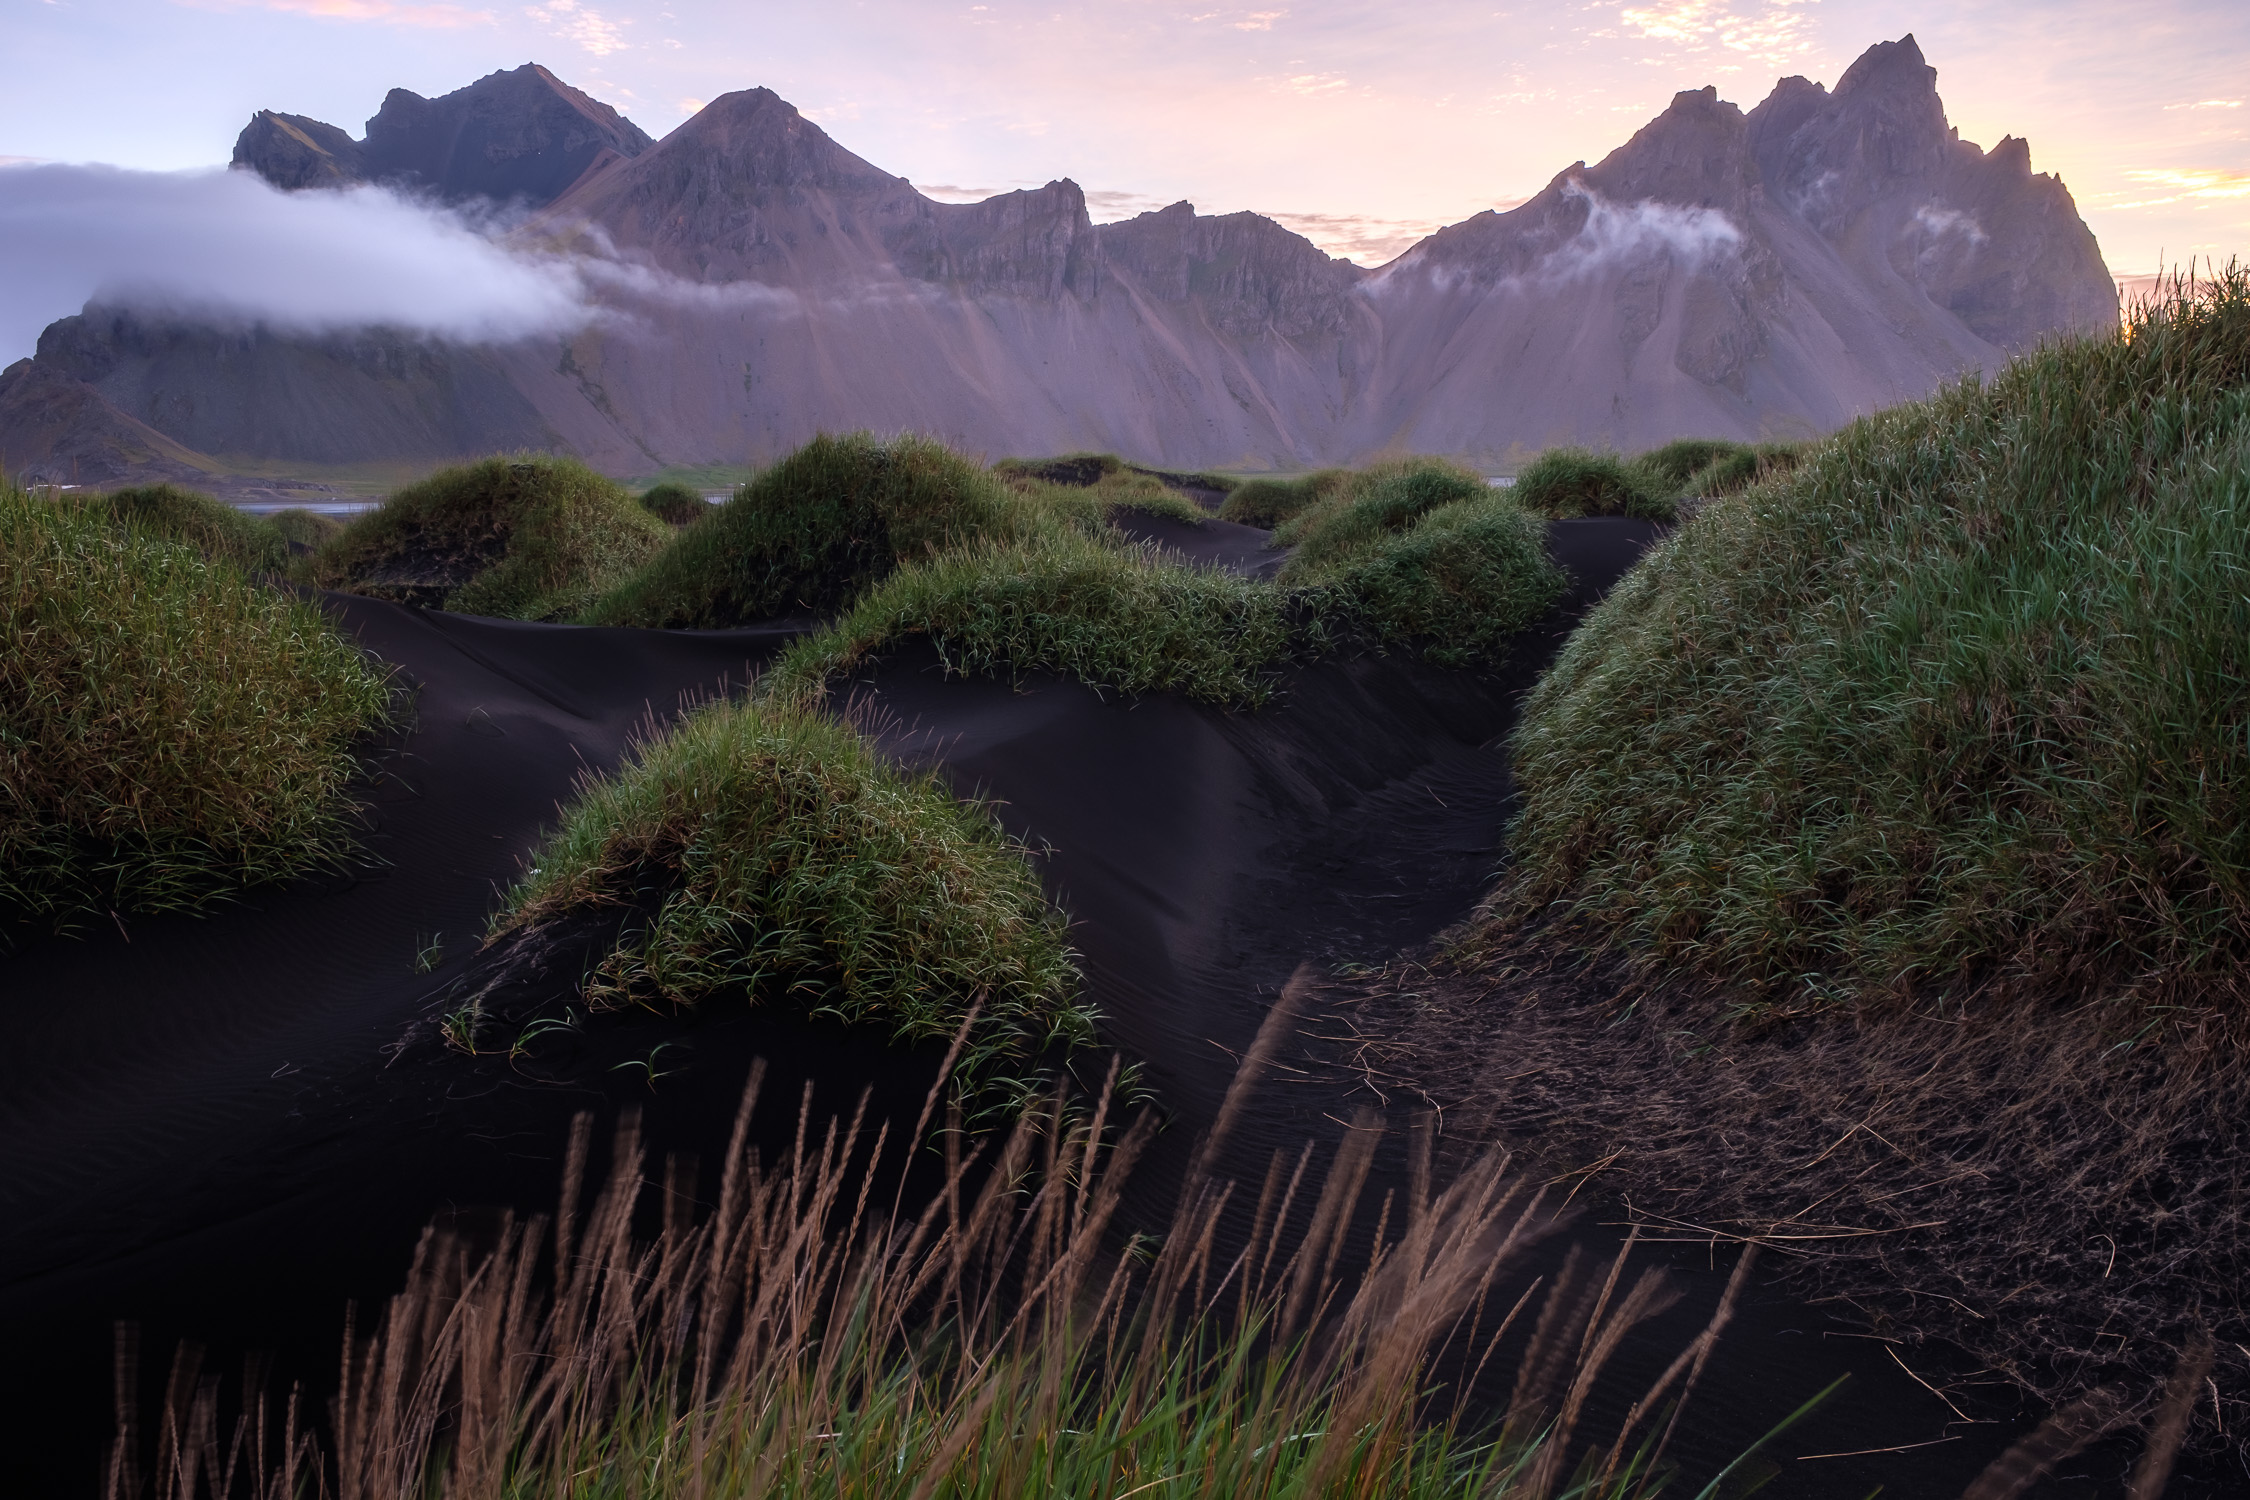  Sand dunes at Stokknses and the famous Vesturhorn mountain at sunrise. 